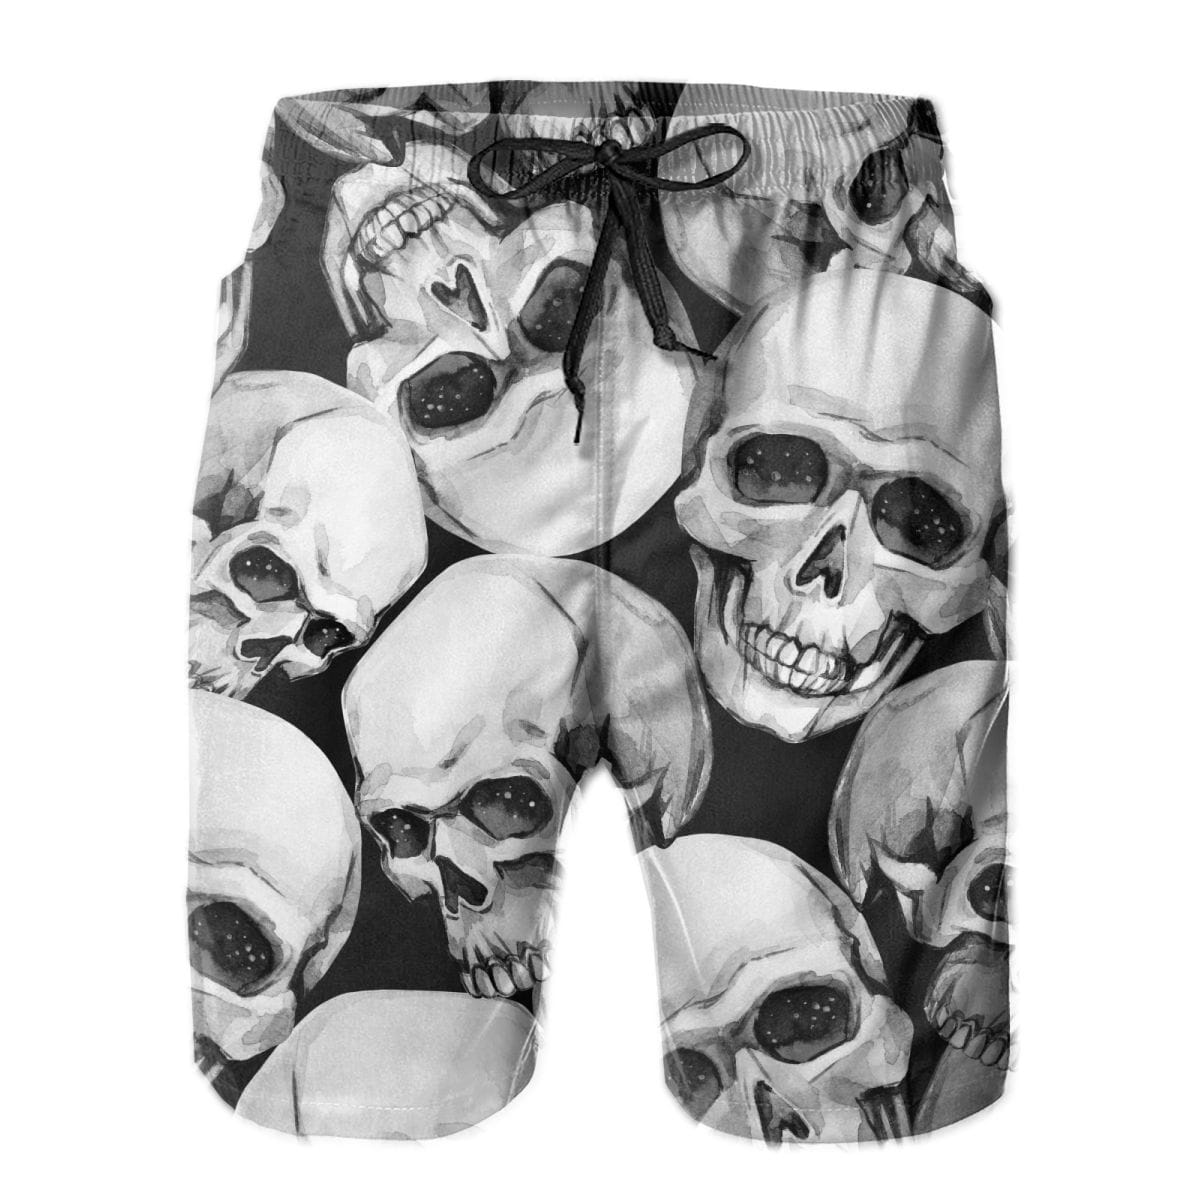 Lots of Skull Heads Quick Dry Swimming Shorts For Men